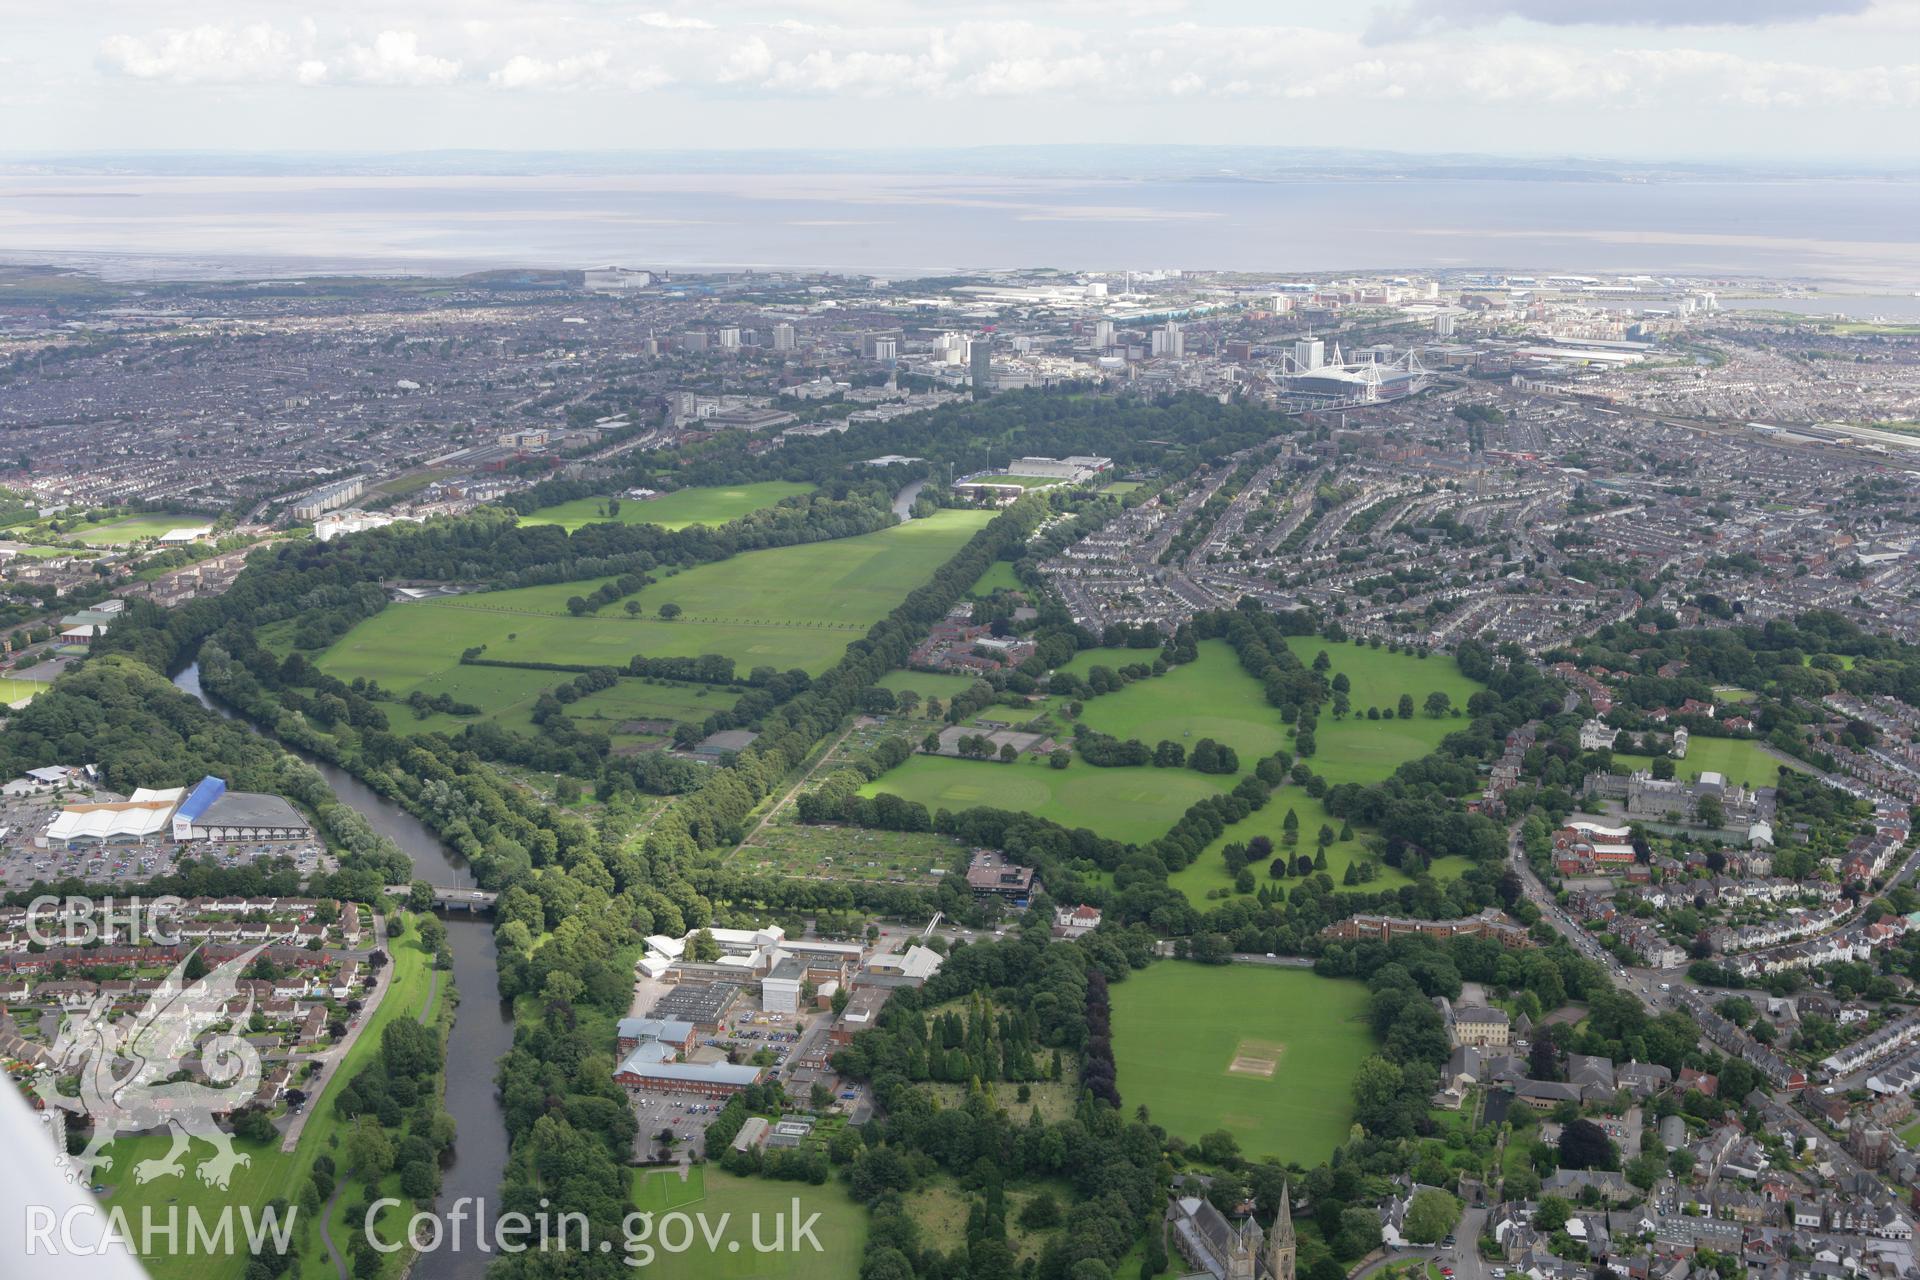 RCAHMW colour oblique aerial photograph of Cardiff. Taken on 30 July 2007 by Toby Driver